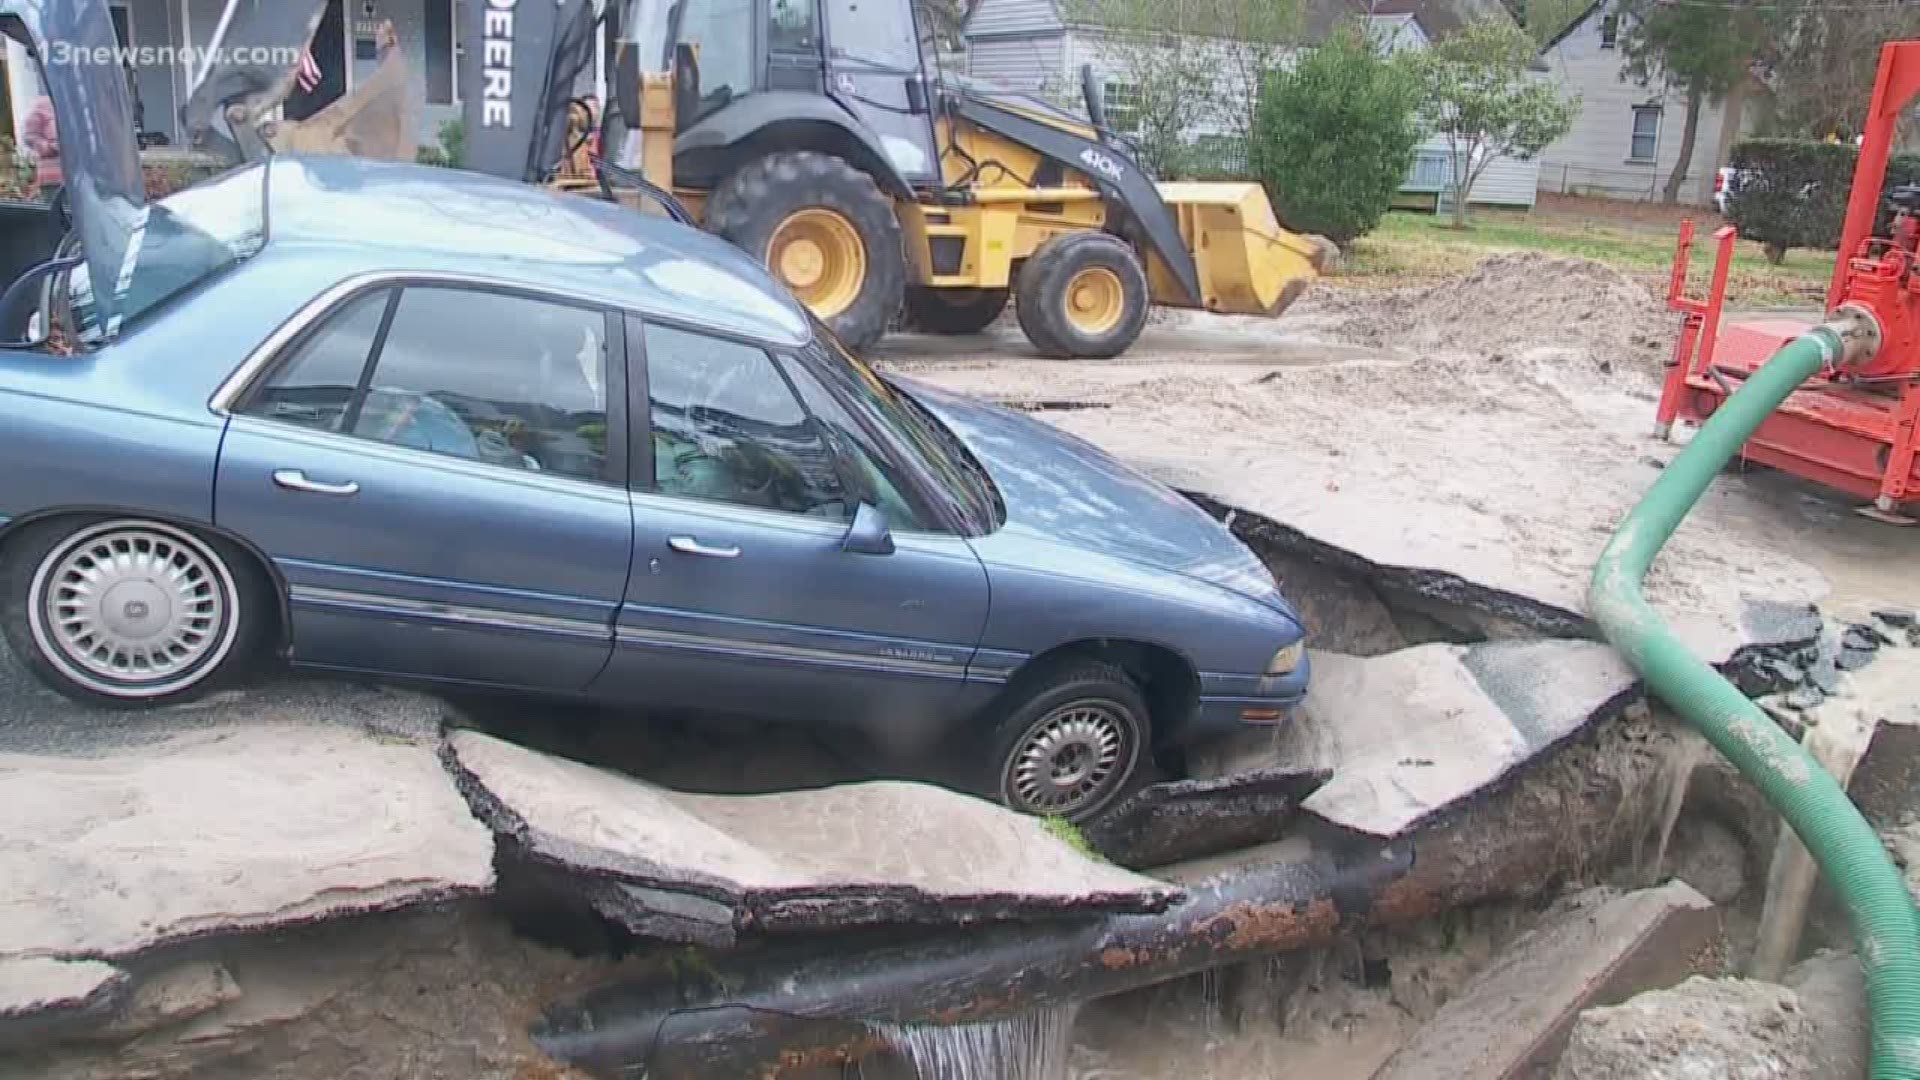 A sinkhole opened up in the Bay View area of Norfolk trapping one car. The driver was able to escape safely.